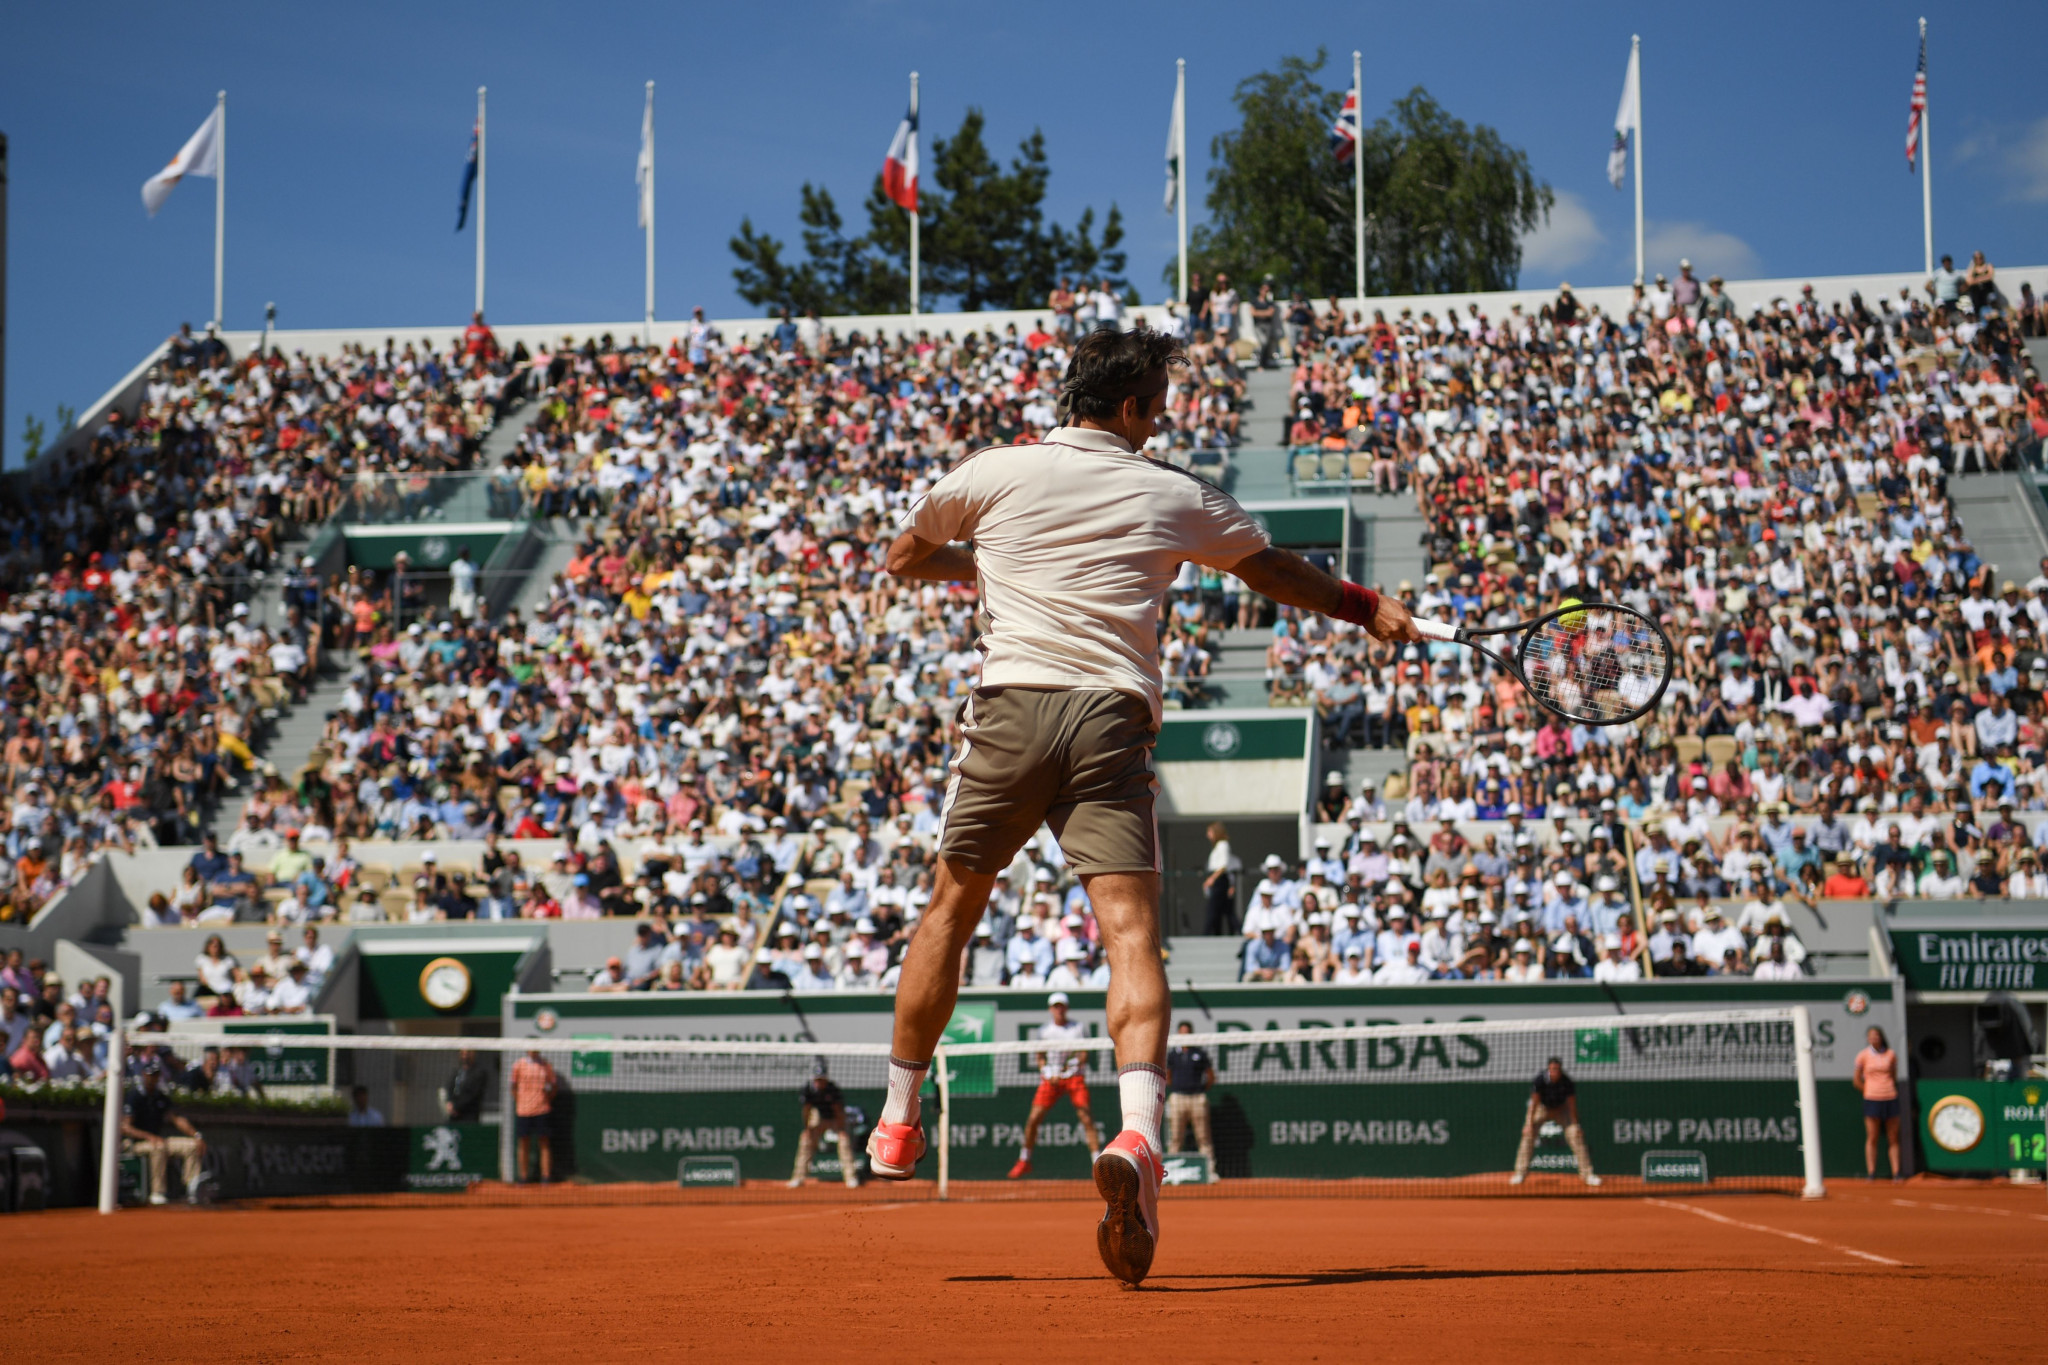 Switzerland's Roger Federer returns the ball against Norway's Casper Ruud during their men's singles third-round match at the French Open ©Getty Images